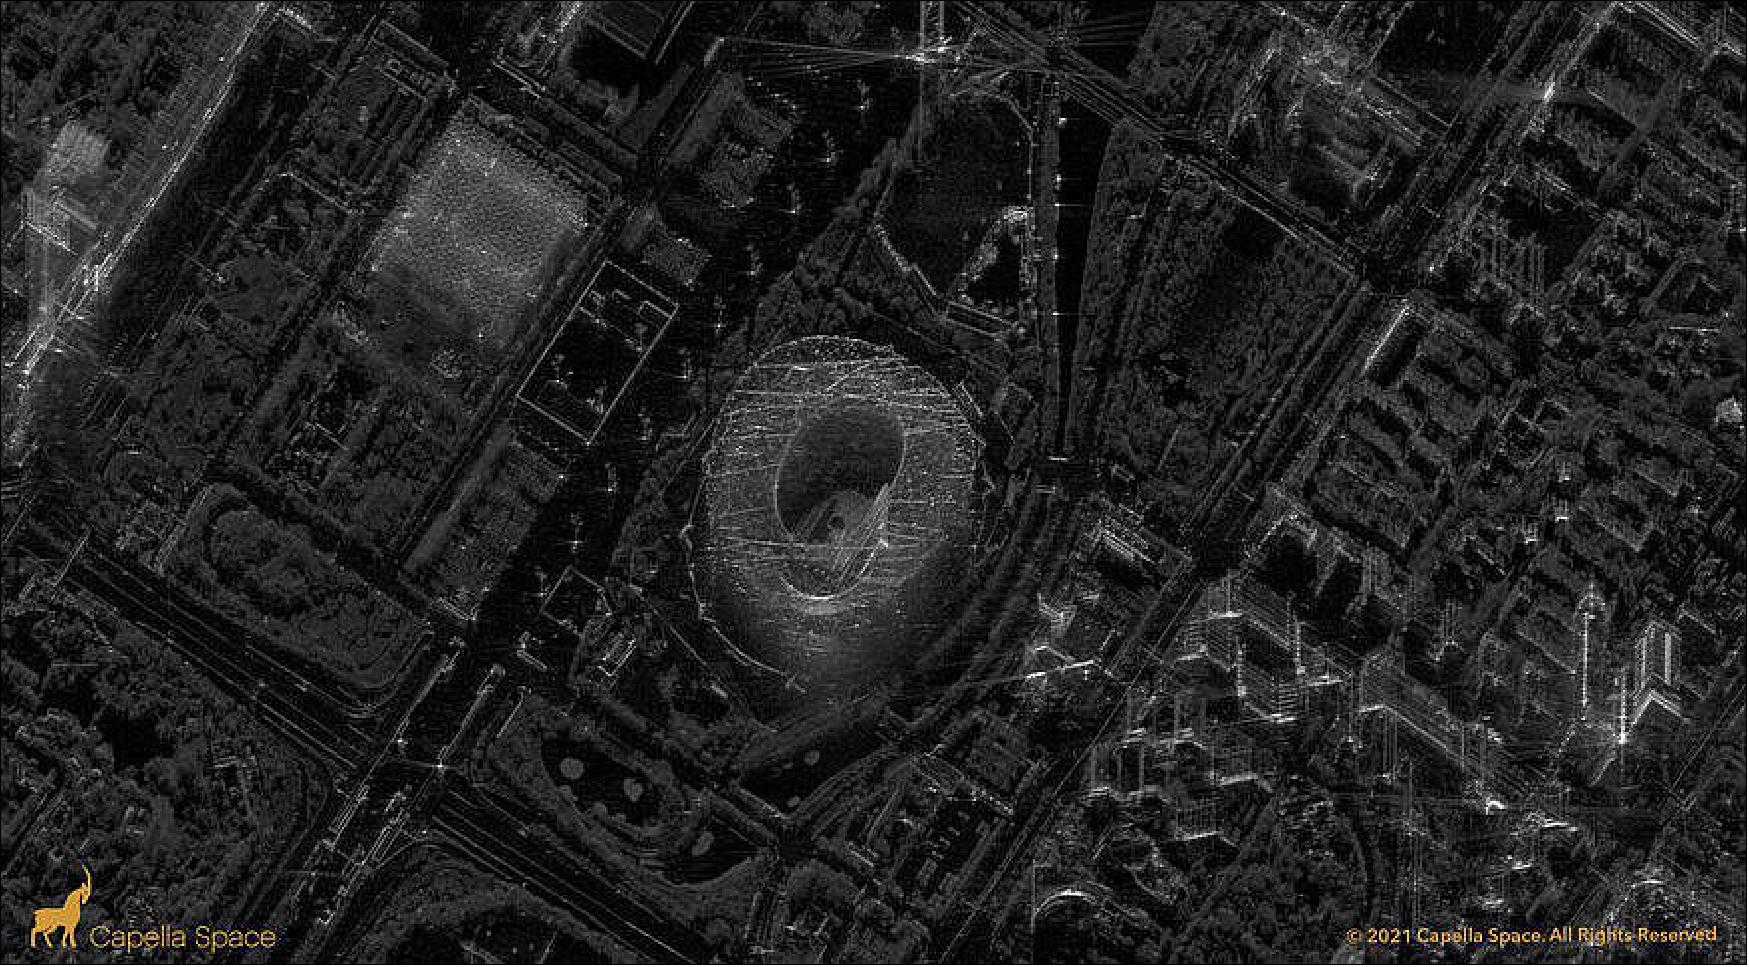 Figure 12: Capella Space synthetic-aperture radar image of the Chinese National Stadium, also known as the Bird's Nest, the site of opening ceremonies for the 2022 winter Olympics in China (image credit: Capella Space)